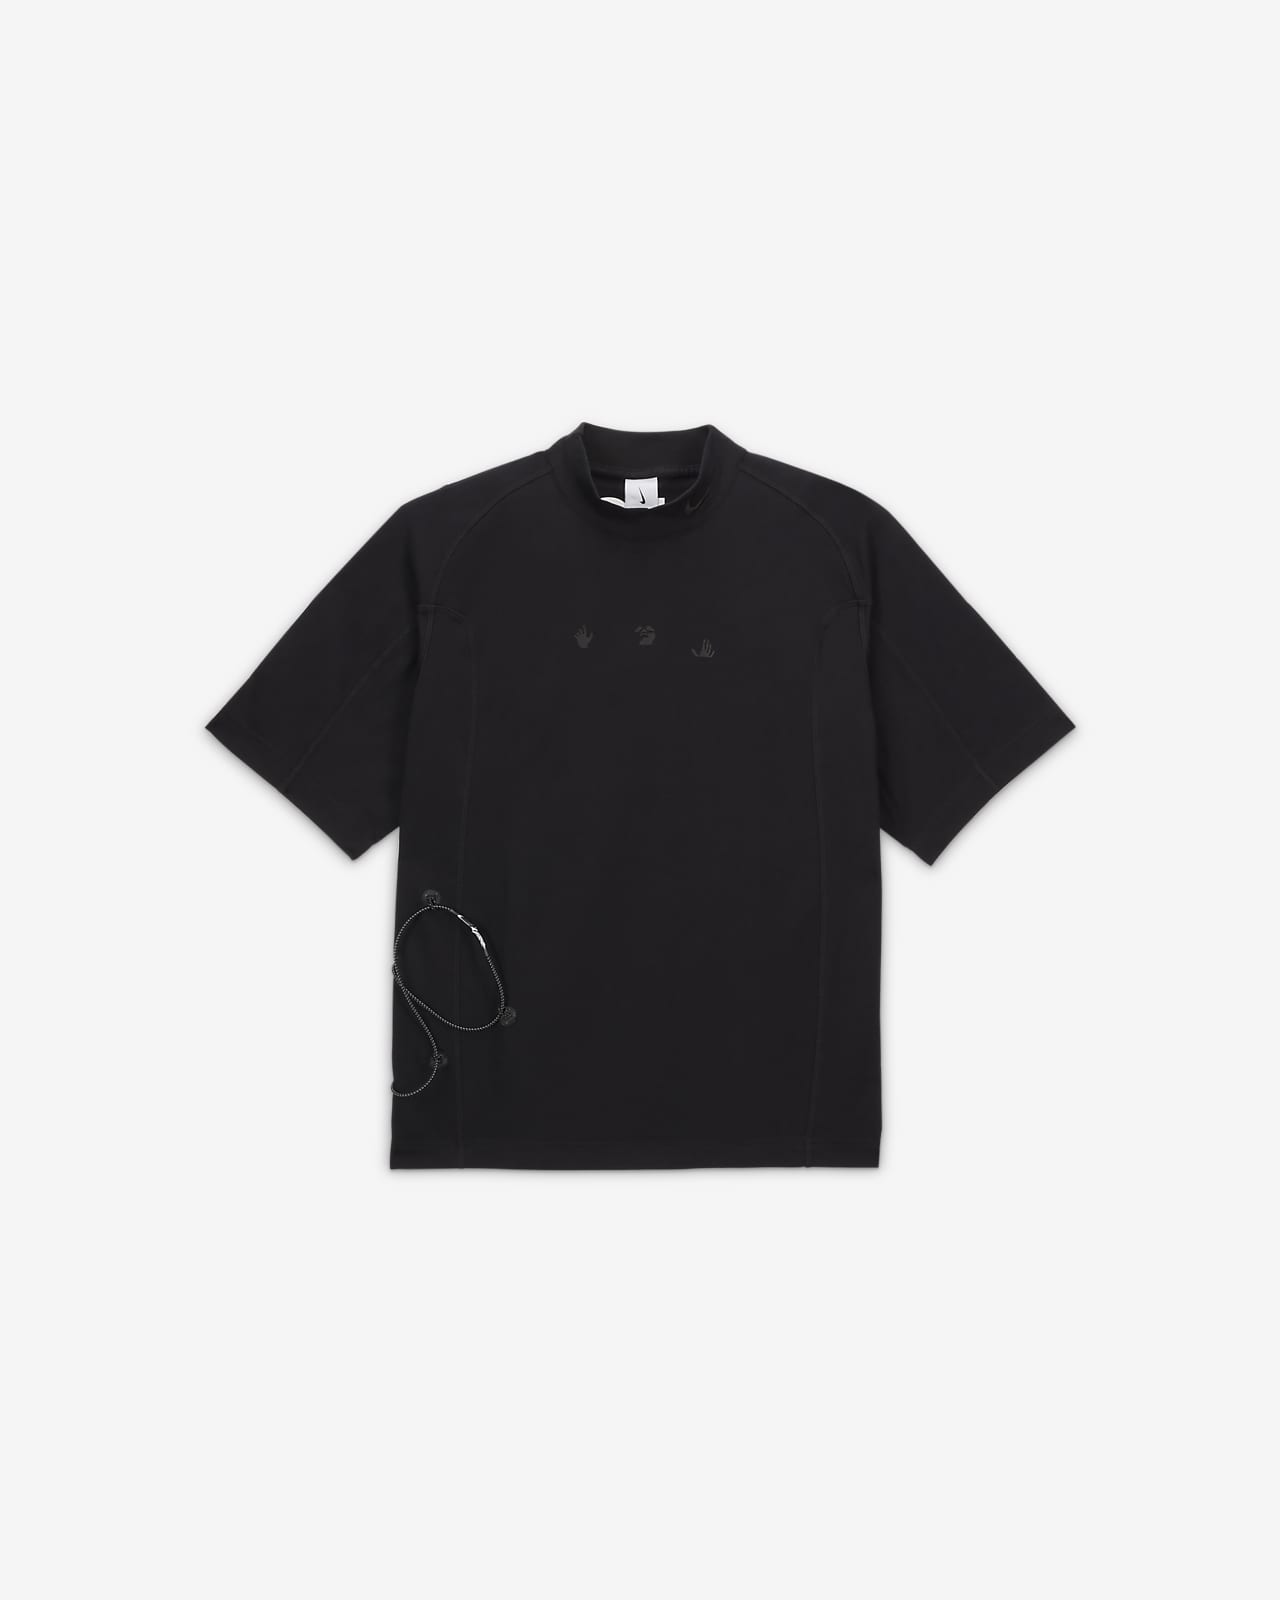 Nike x Off-White Short Sleeve Top \